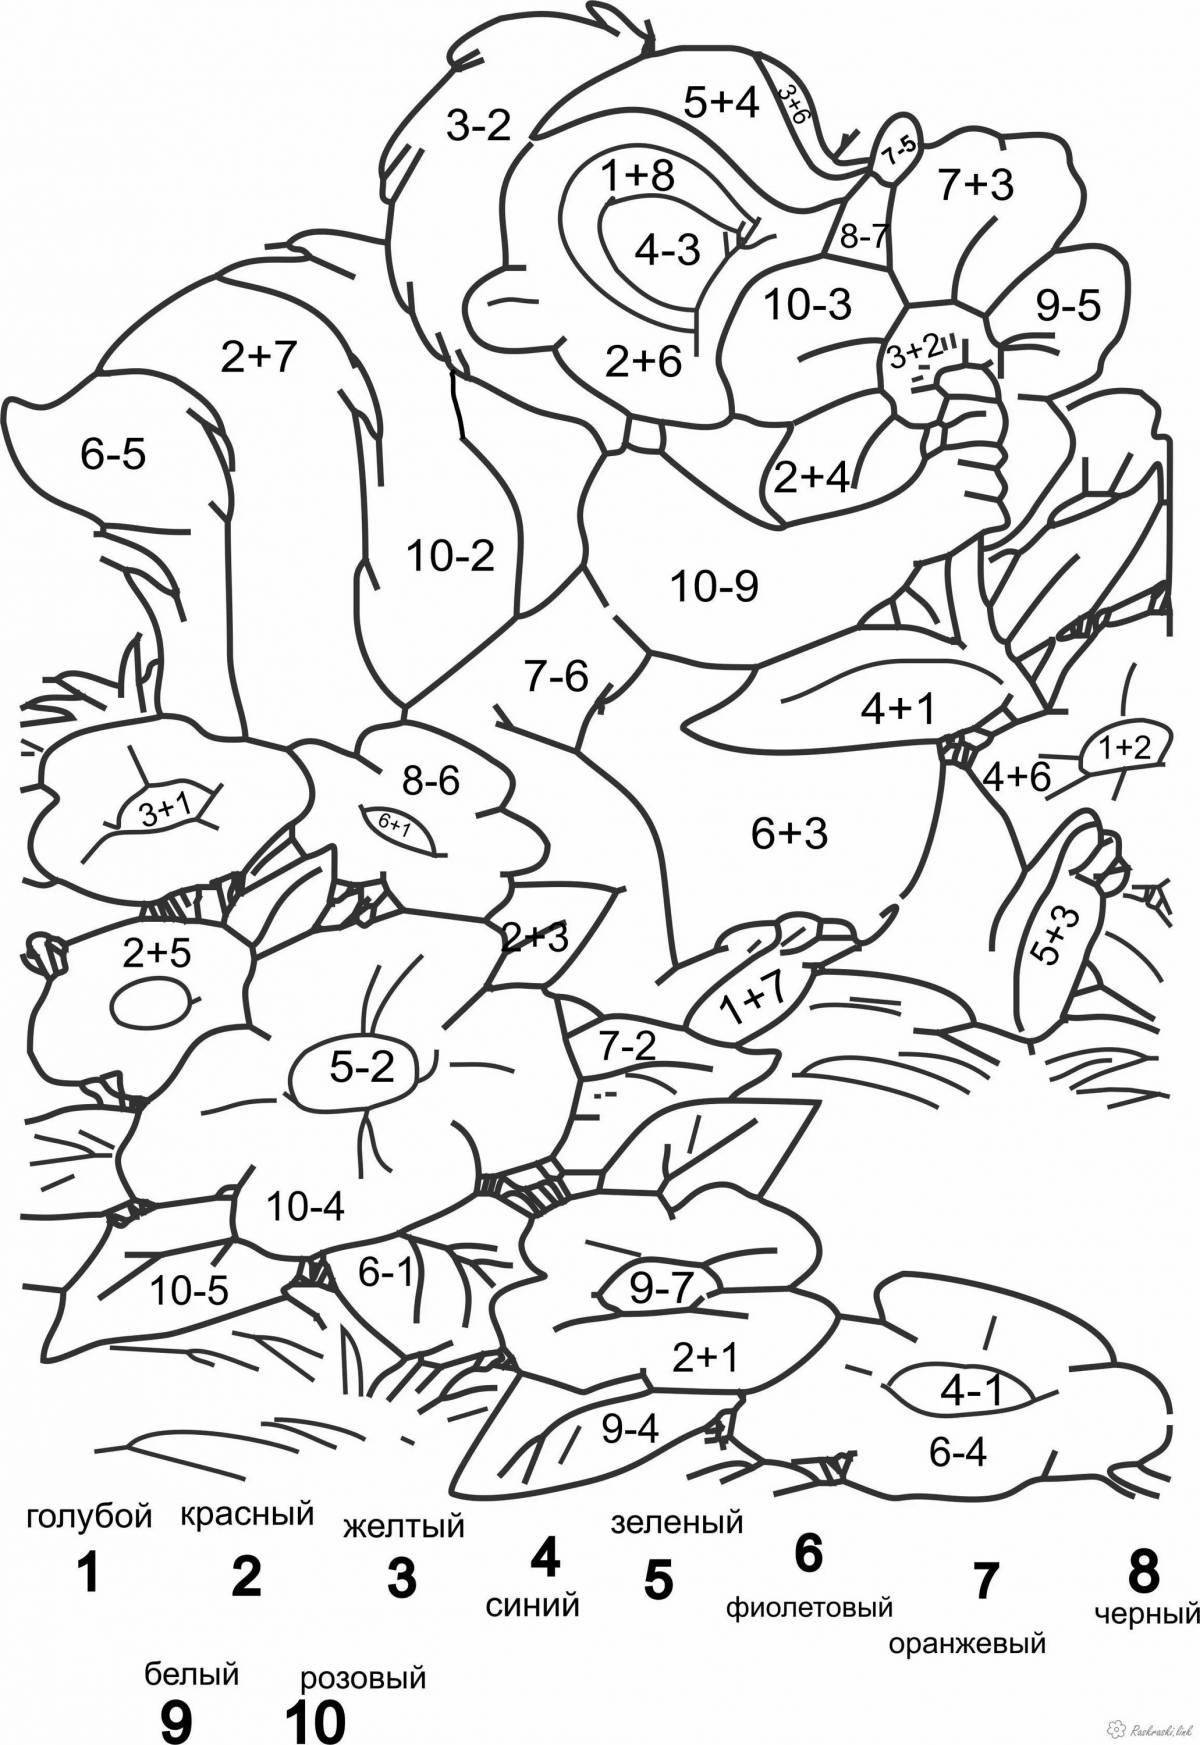 Fancy coloring page score within 10 simulator 1 class